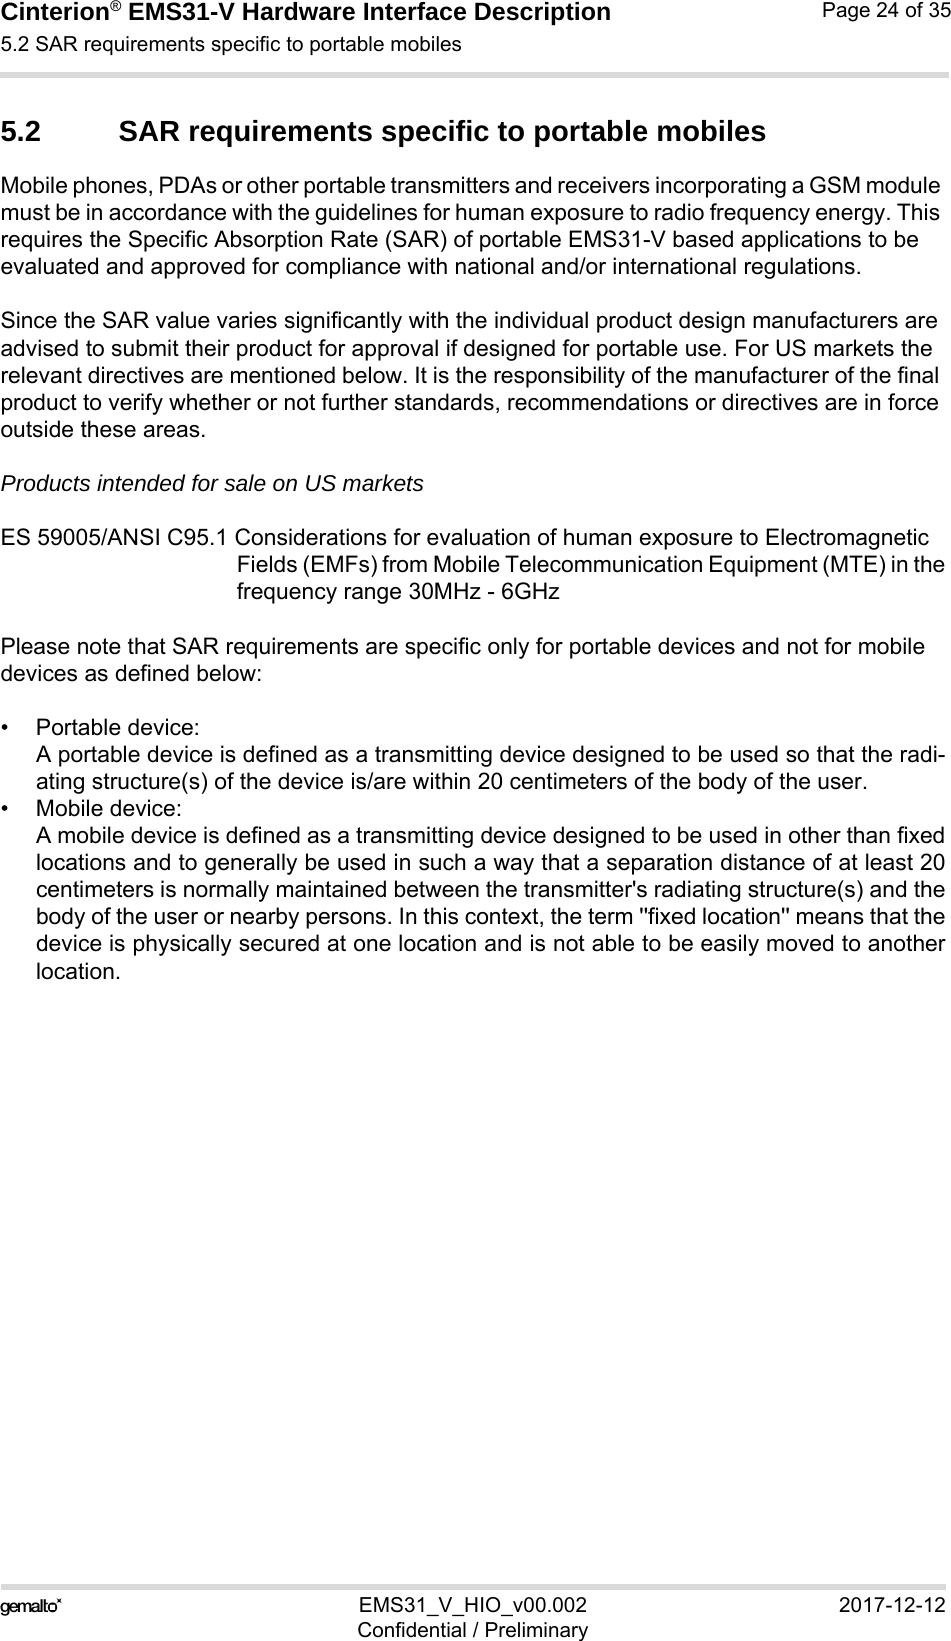 Cinterion® EMS31-V Hardware Interface Description5.2 SAR requirements specific to portable mobiles27EMS31_V_HIO_v00.002 2017-12-12Confidential / PreliminaryPage 24 of 355.2 SAR requirements specific to portable mobilesMobile phones, PDAs or other portable transmitters and receivers incorporating a GSM module must be in accordance with the guidelines for human exposure to radio frequency energy. This requires the Specific Absorption Rate (SAR) of portable EMS31-V based applications to be evaluated and approved for compliance with national and/or international regulations. Since the SAR value varies significantly with the individual product design manufacturers are advised to submit their product for approval if designed for portable use. For US markets the relevant directives are mentioned below. It is the responsibility of the manufacturer of the final product to verify whether or not further standards, recommendations or directives are in force outside these areas. Products intended for sale on US marketsES 59005/ANSI C95.1 Considerations for evaluation of human exposure to Electromagnetic Fields (EMFs) from Mobile Telecommunication Equipment (MTE) in thefrequency range 30MHz - 6GHz Please note that SAR requirements are specific only for portable devices and not for mobile devices as defined below:• Portable device:A portable device is defined as a transmitting device designed to be used so that the radi-ating structure(s) of the device is/are within 20 centimeters of the body of the user.• Mobile device:A mobile device is defined as a transmitting device designed to be used in other than fixedlocations and to generally be used in such a way that a separation distance of at least 20centimeters is normally maintained between the transmitter&apos;s radiating structure(s) and thebody of the user or nearby persons. In this context, the term &apos;&apos;fixed location&apos;&apos; means that thedevice is physically secured at one location and is not able to be easily moved to anotherlocation.